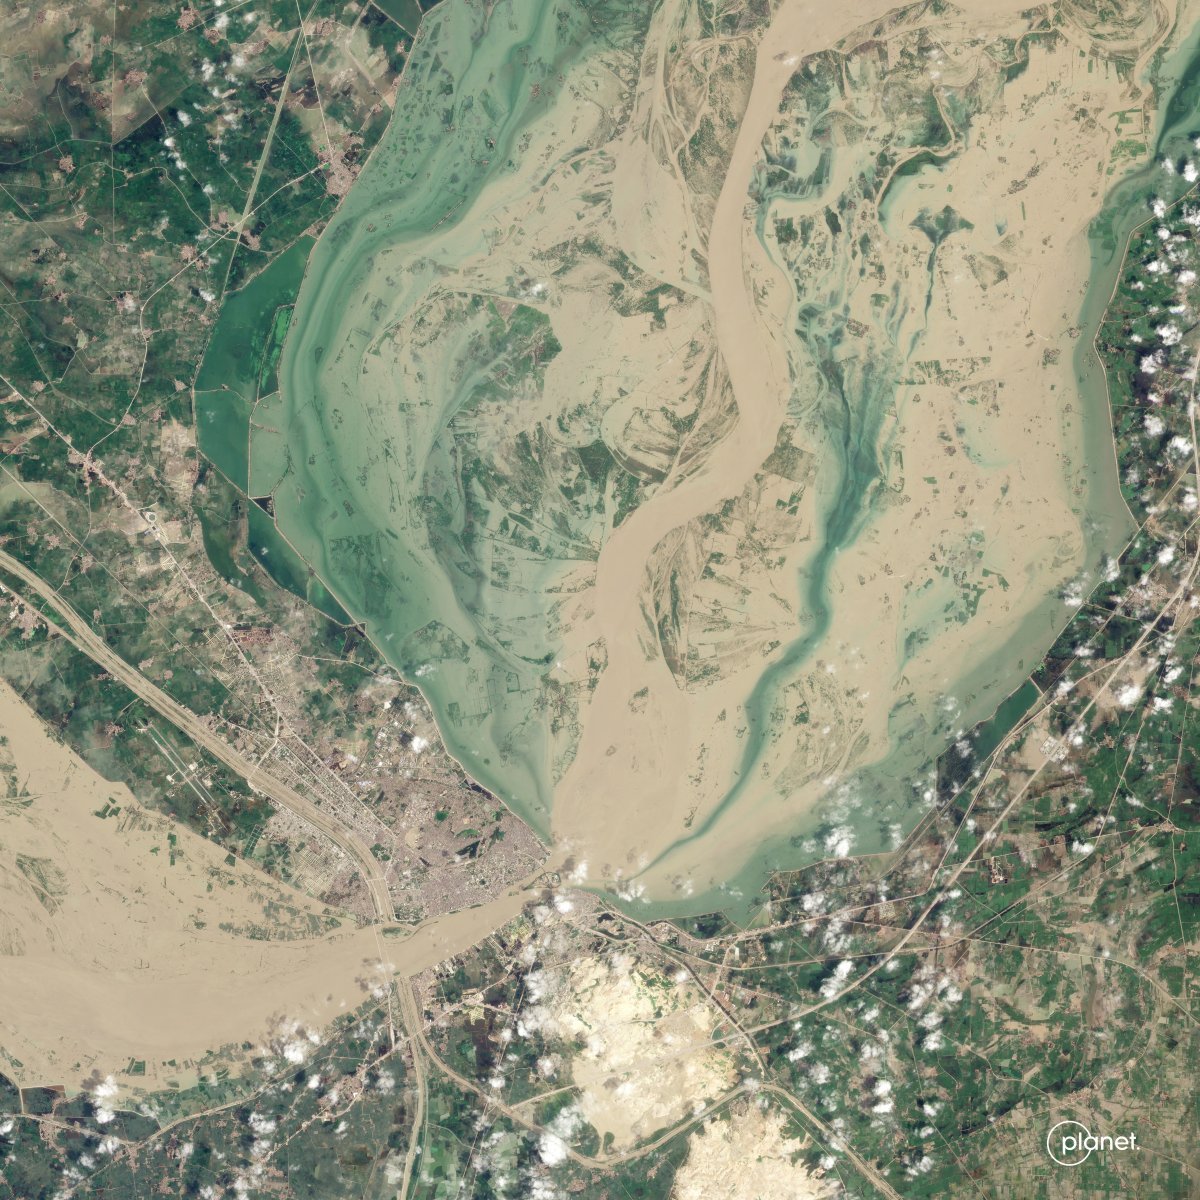 Satellite images showing the extent of the flood disaster in Pakistan #12